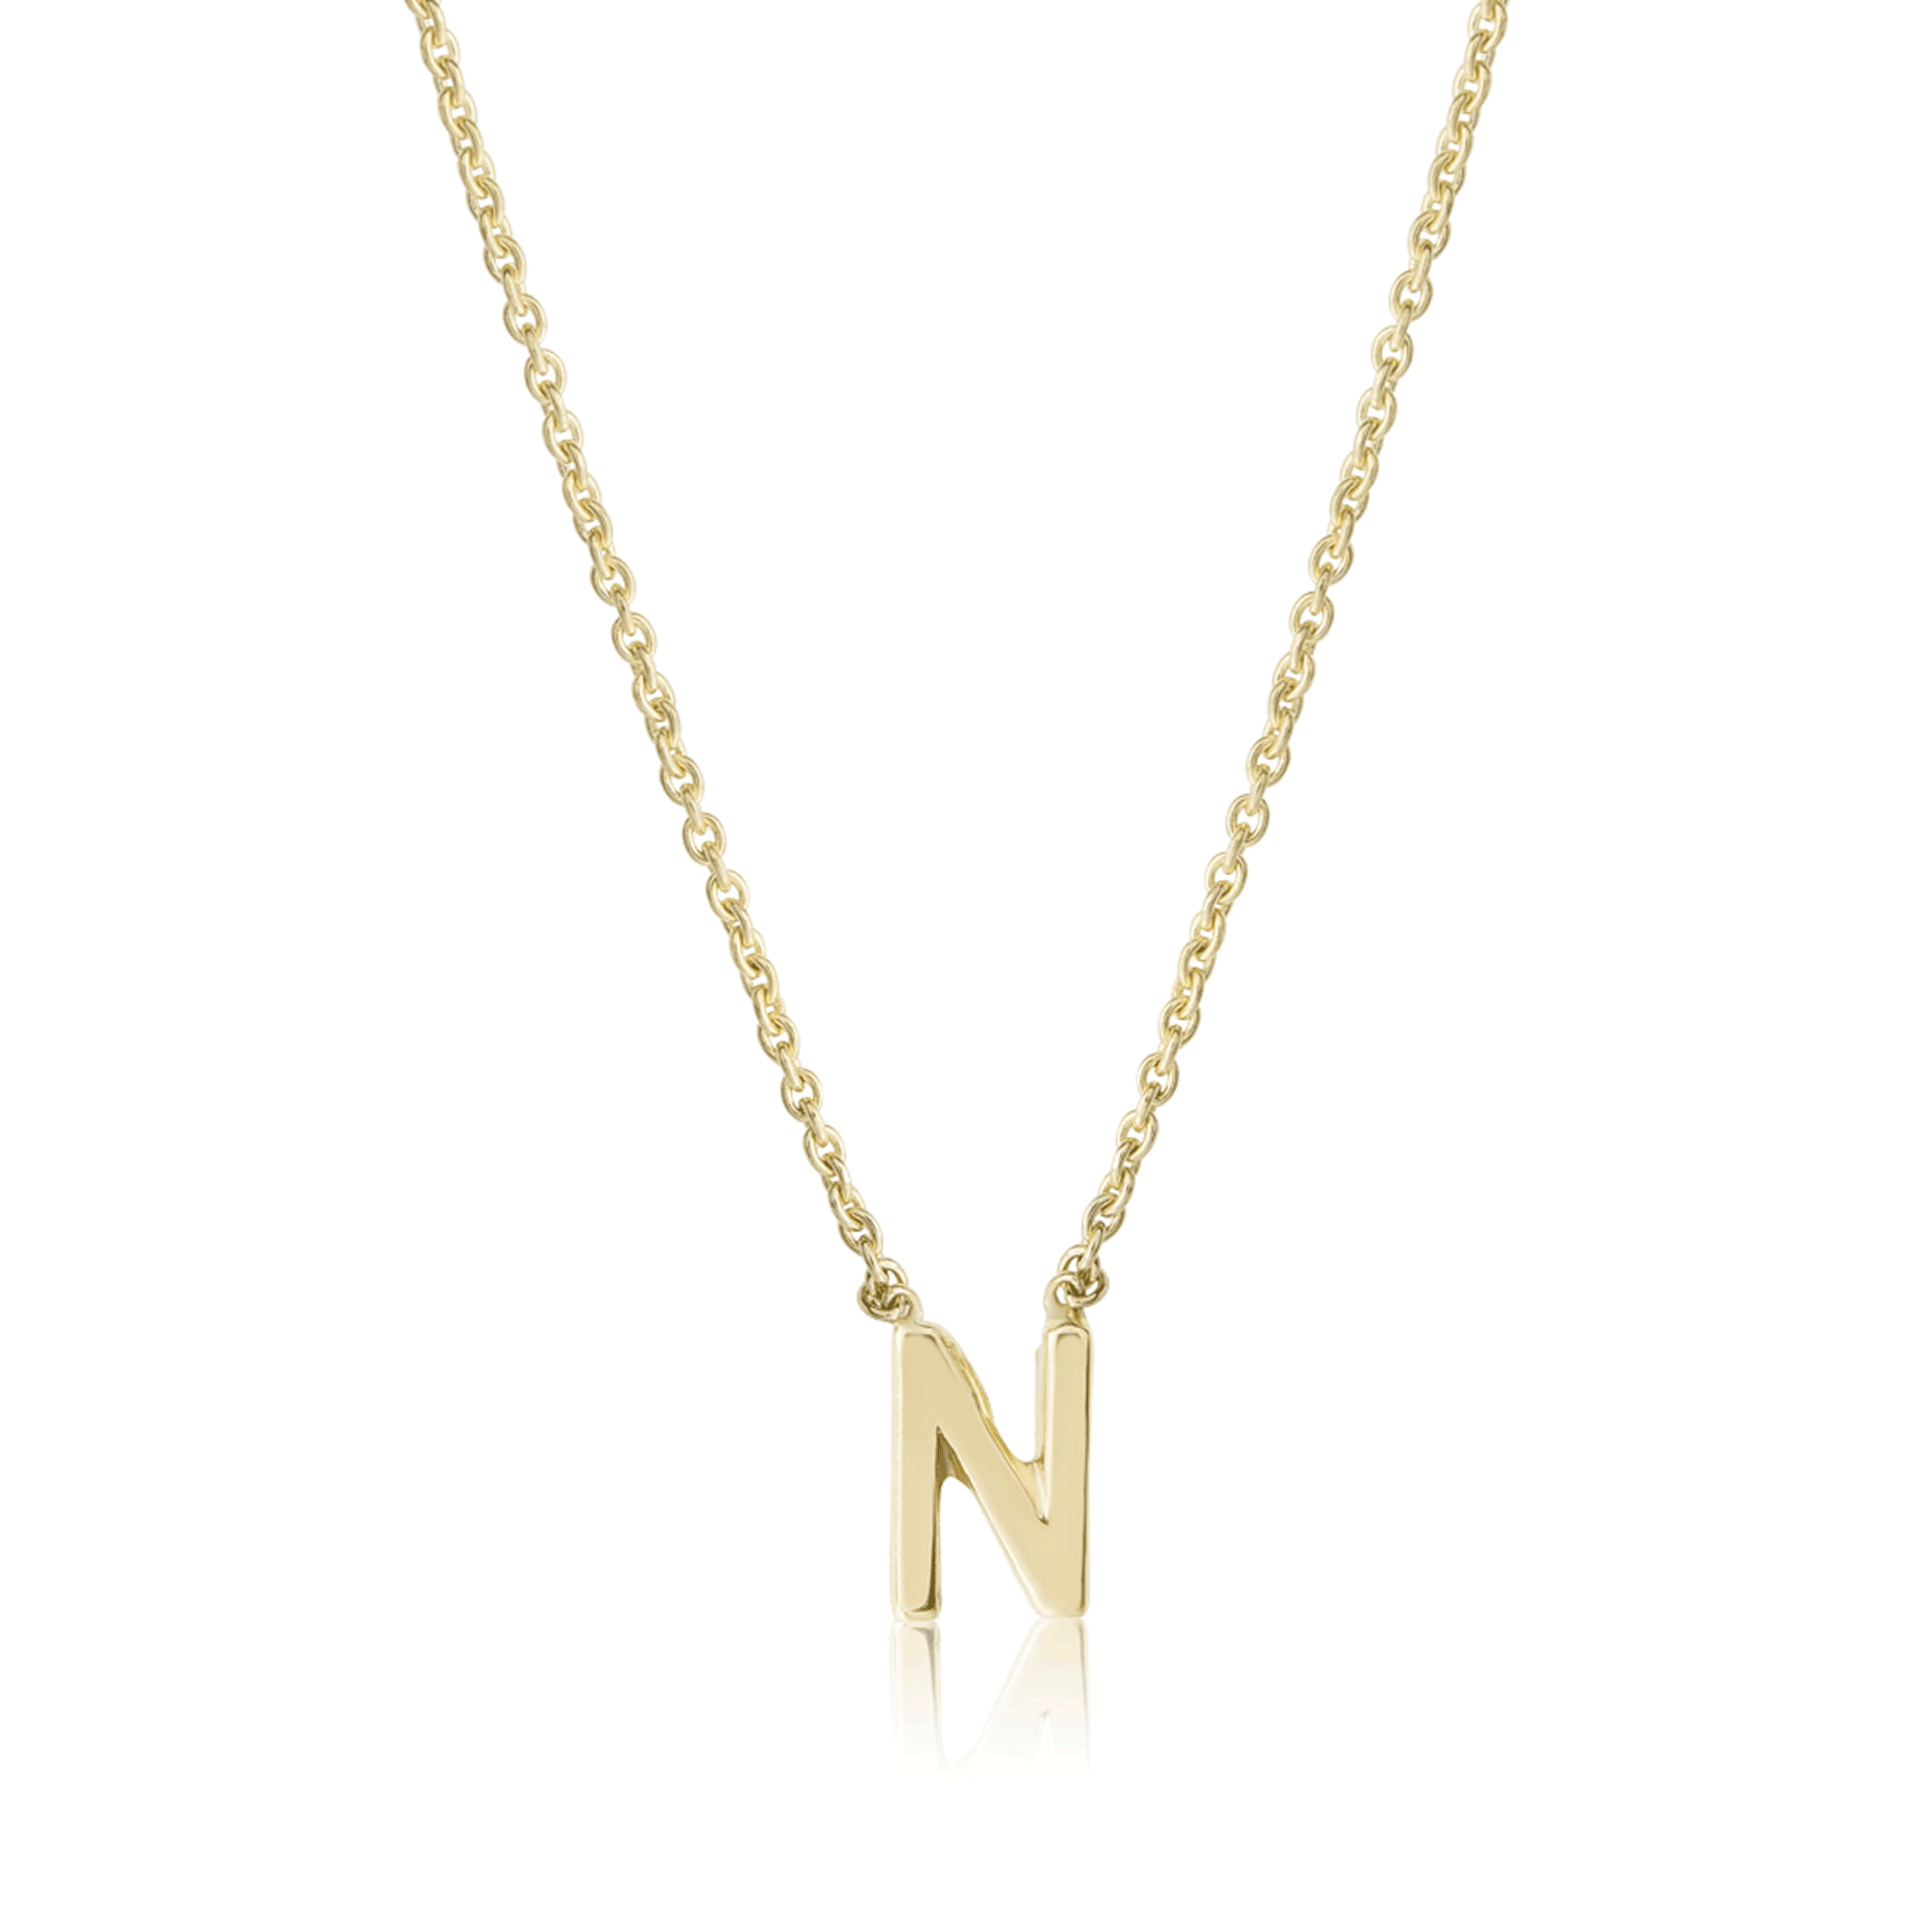 Initial Necklace, 14K White Gold Letter Necklace, Gold Letter Pendant,  Layering Necklace, All Letters Available, Letter S Necklace